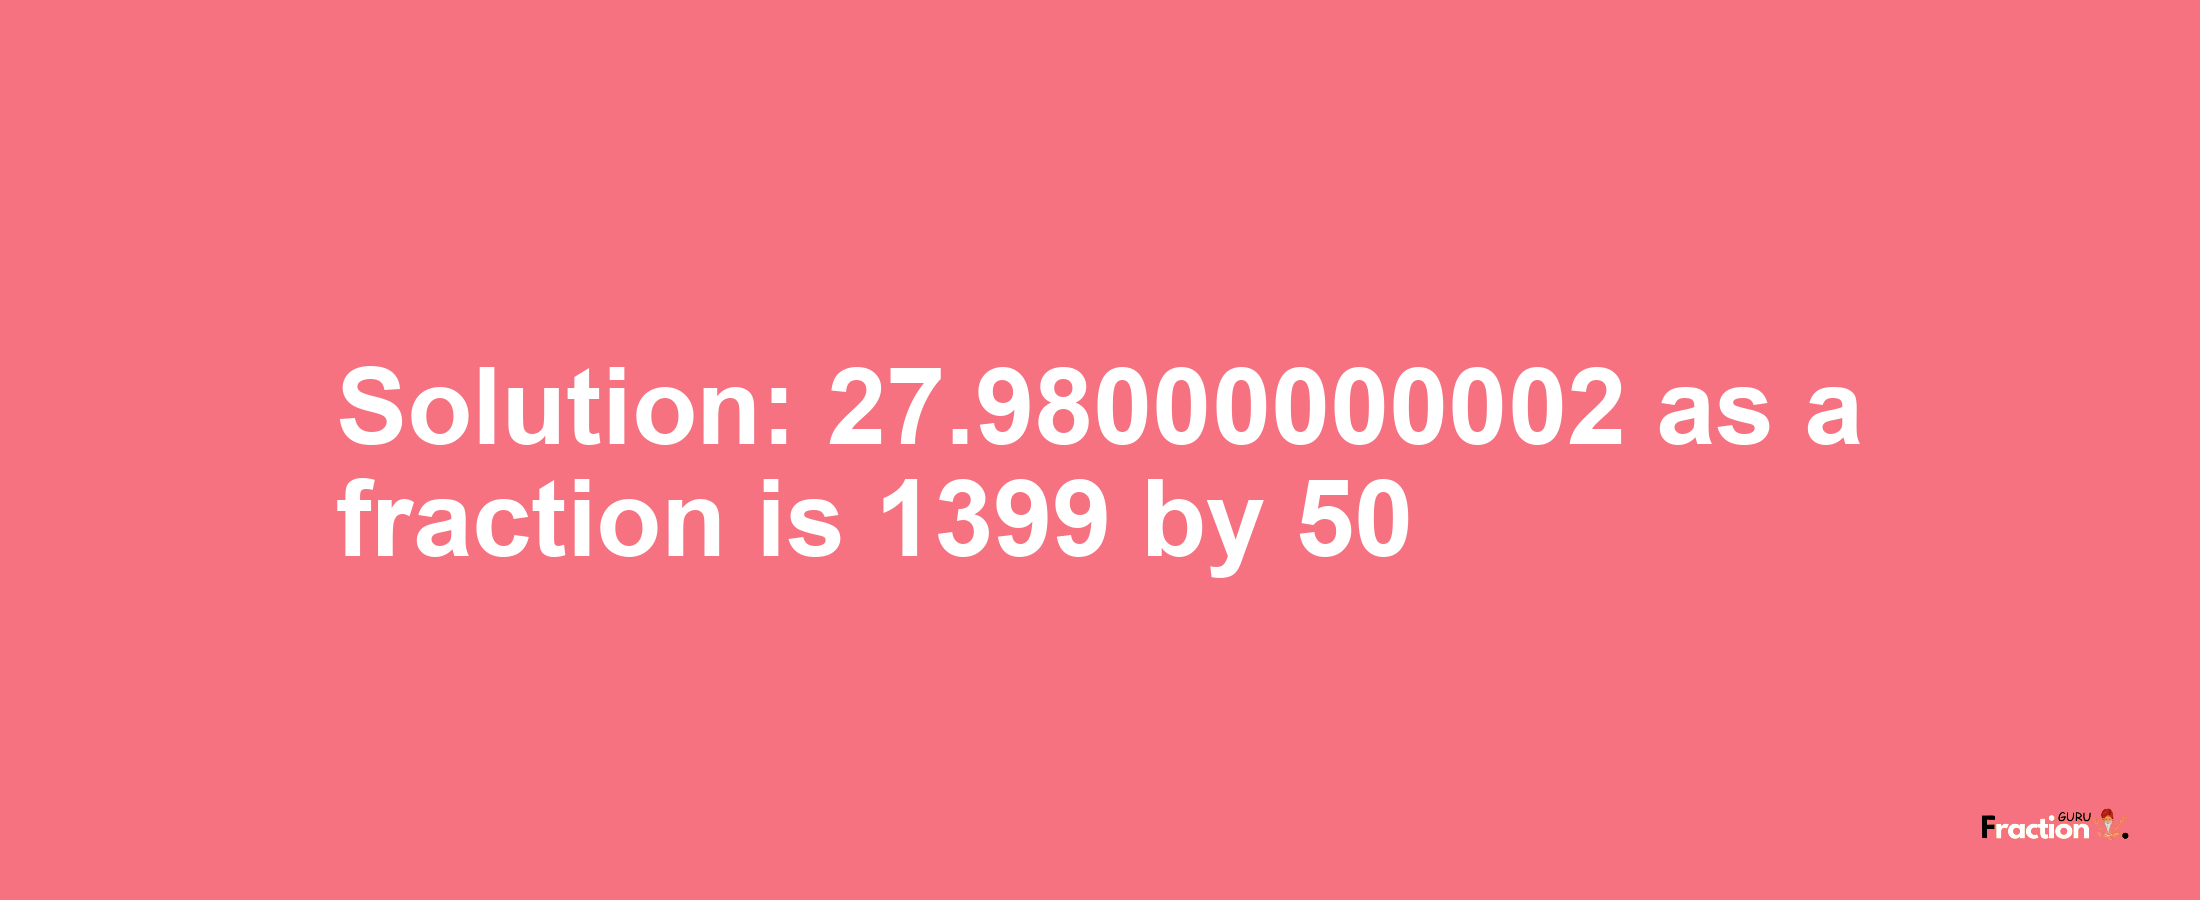 Solution:27.98000000002 as a fraction is 1399/50